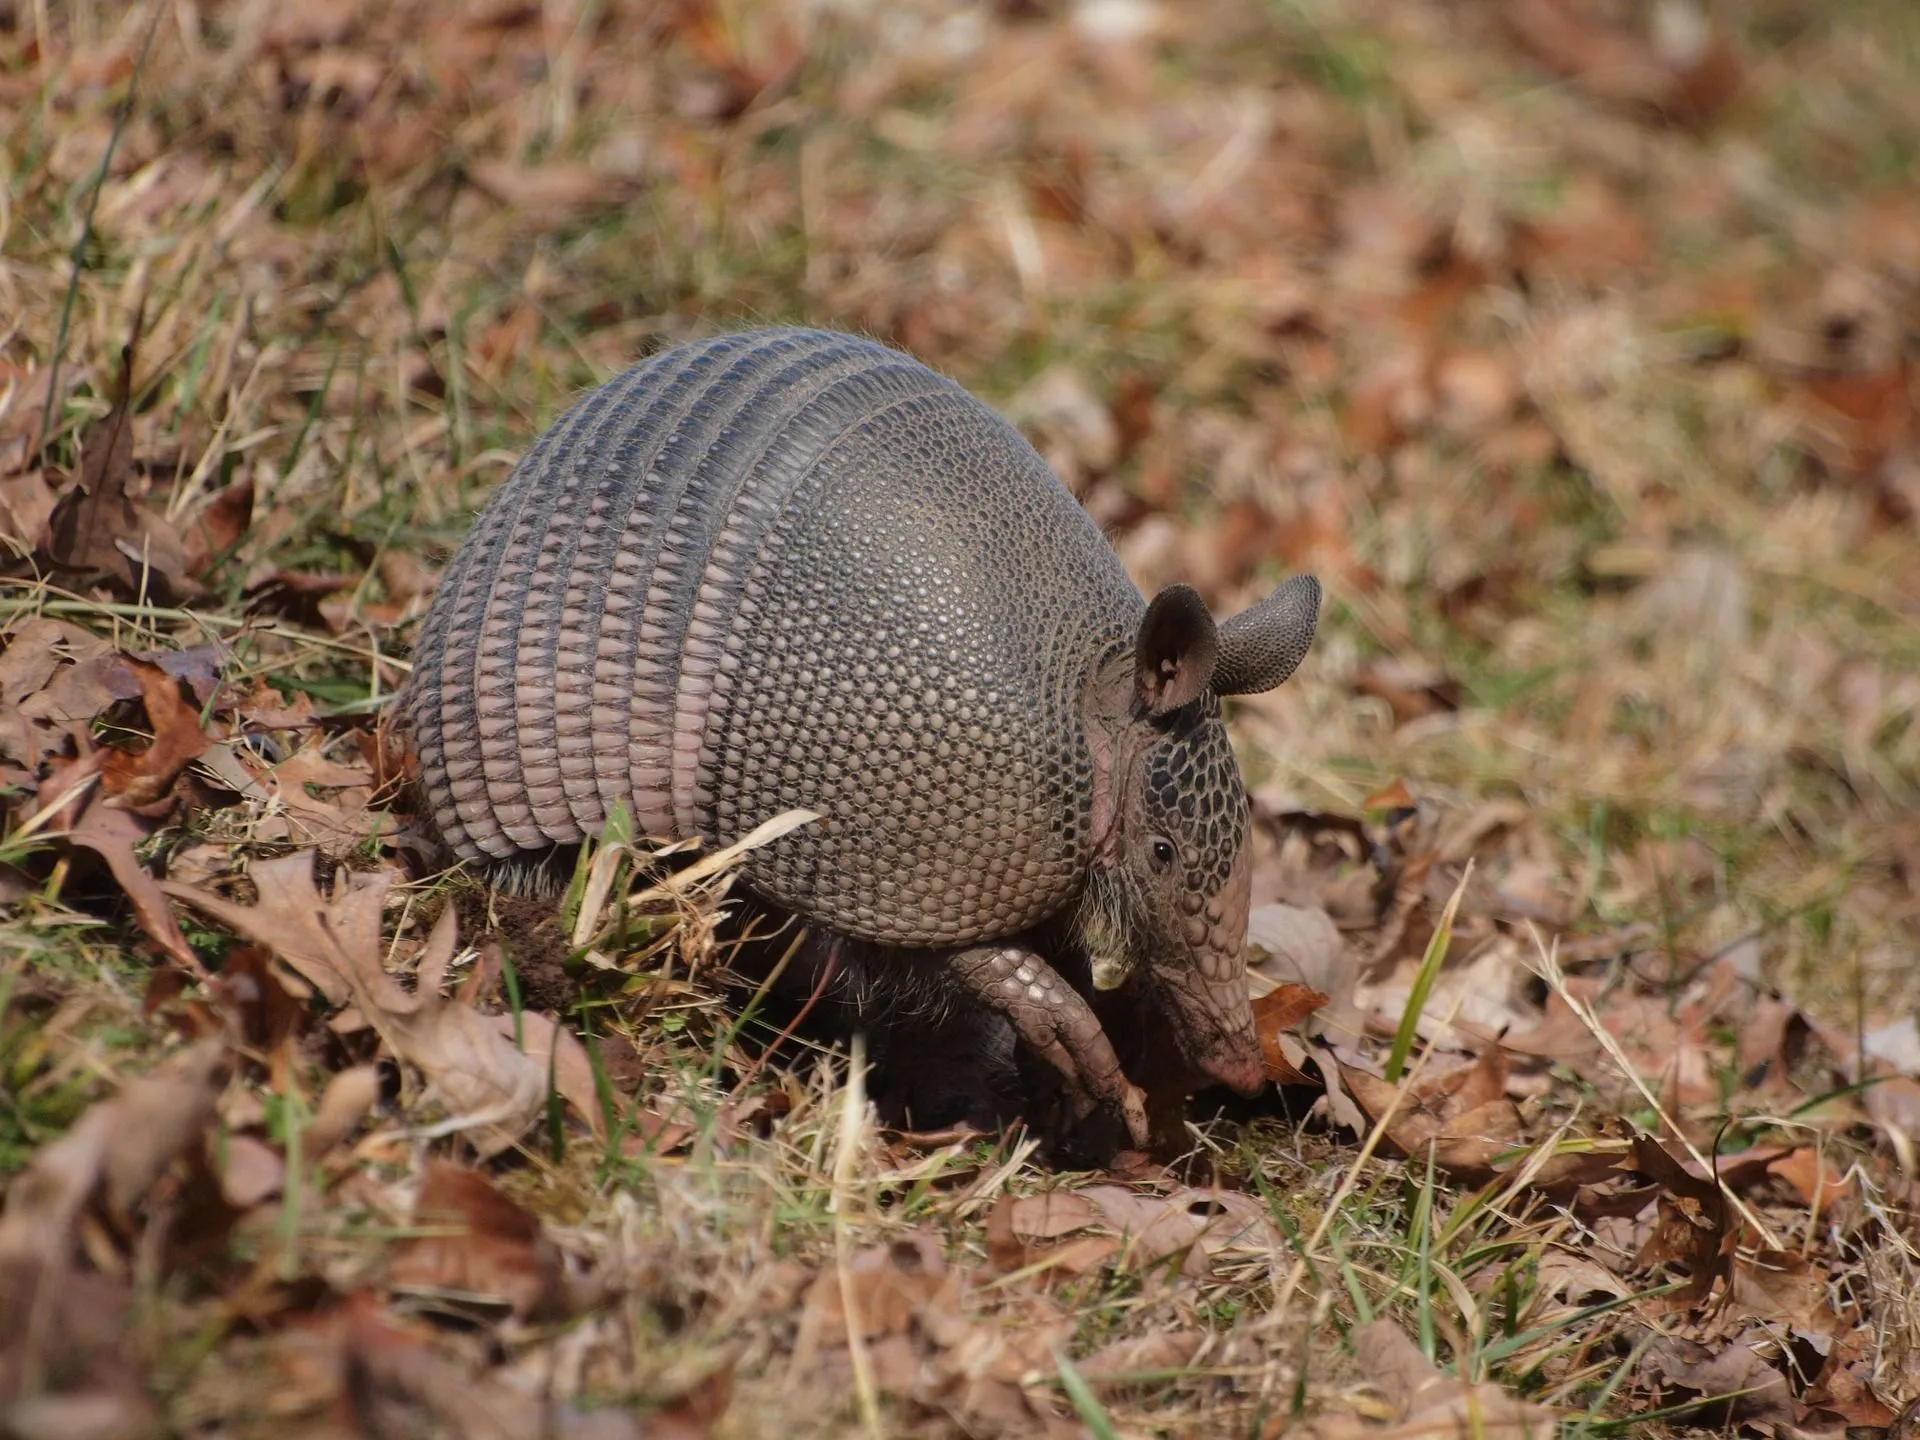 Many people want to know the answer to 'do armadillos lay eggs?'